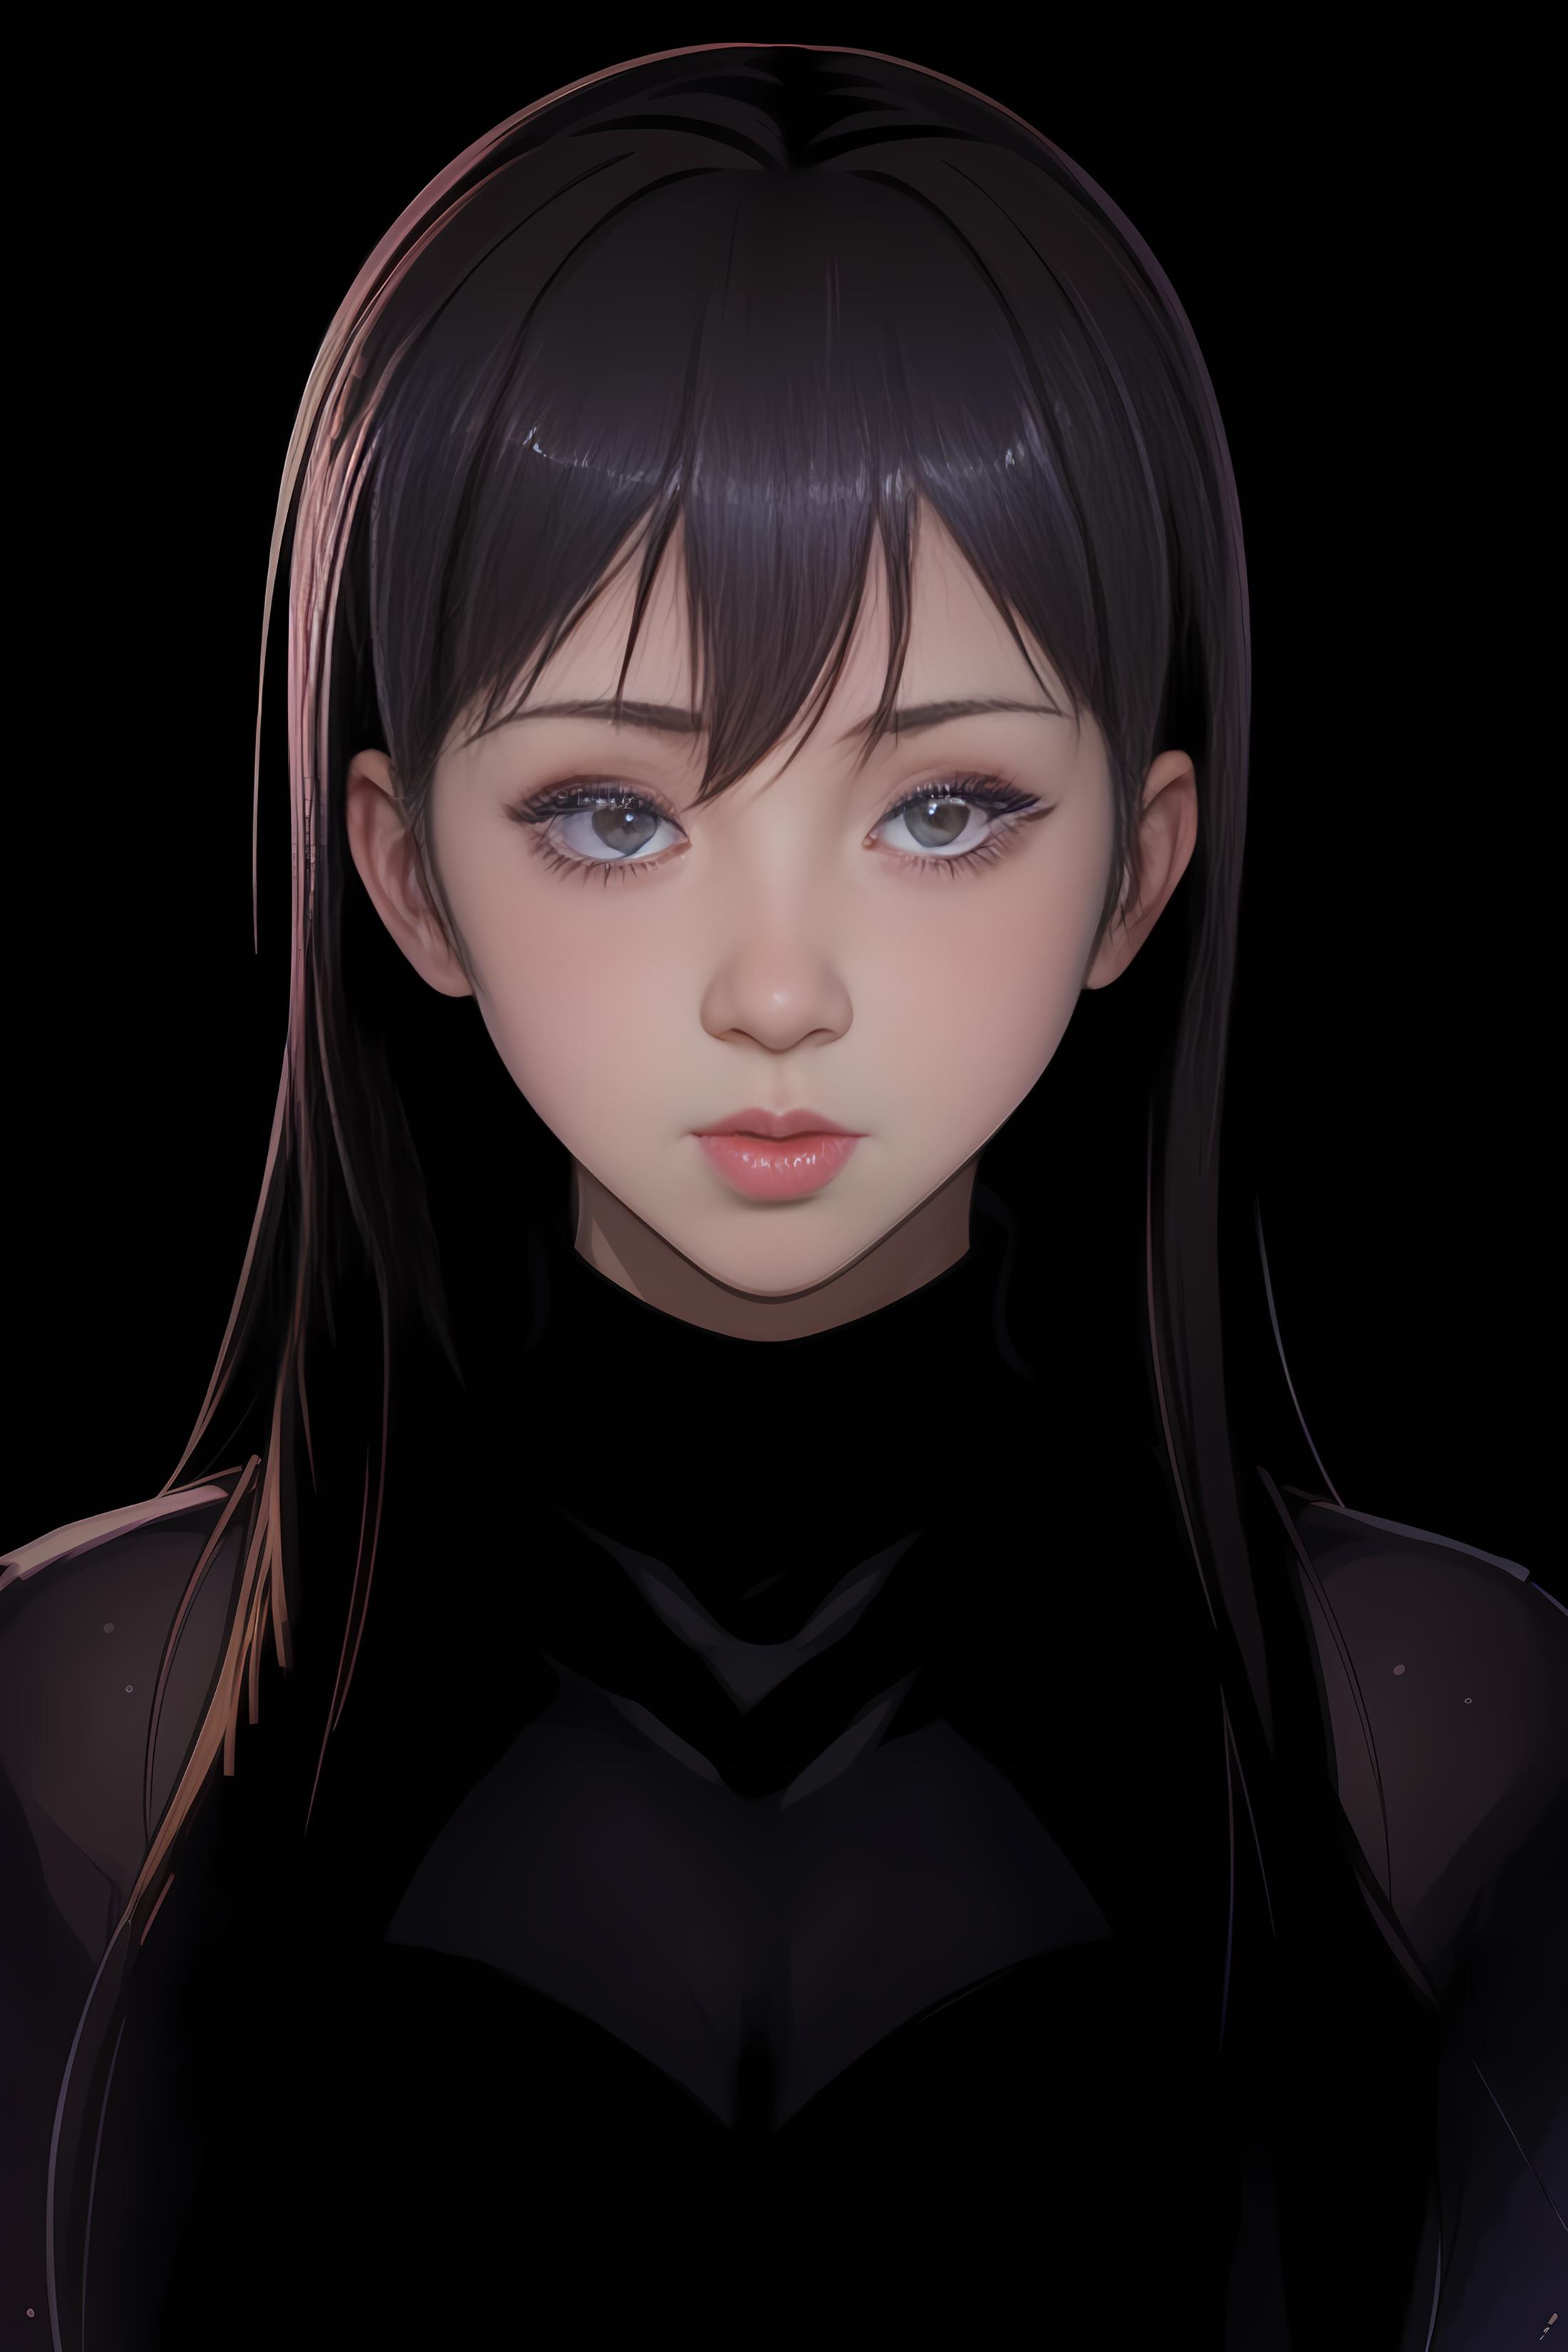 AI model image by dbst17